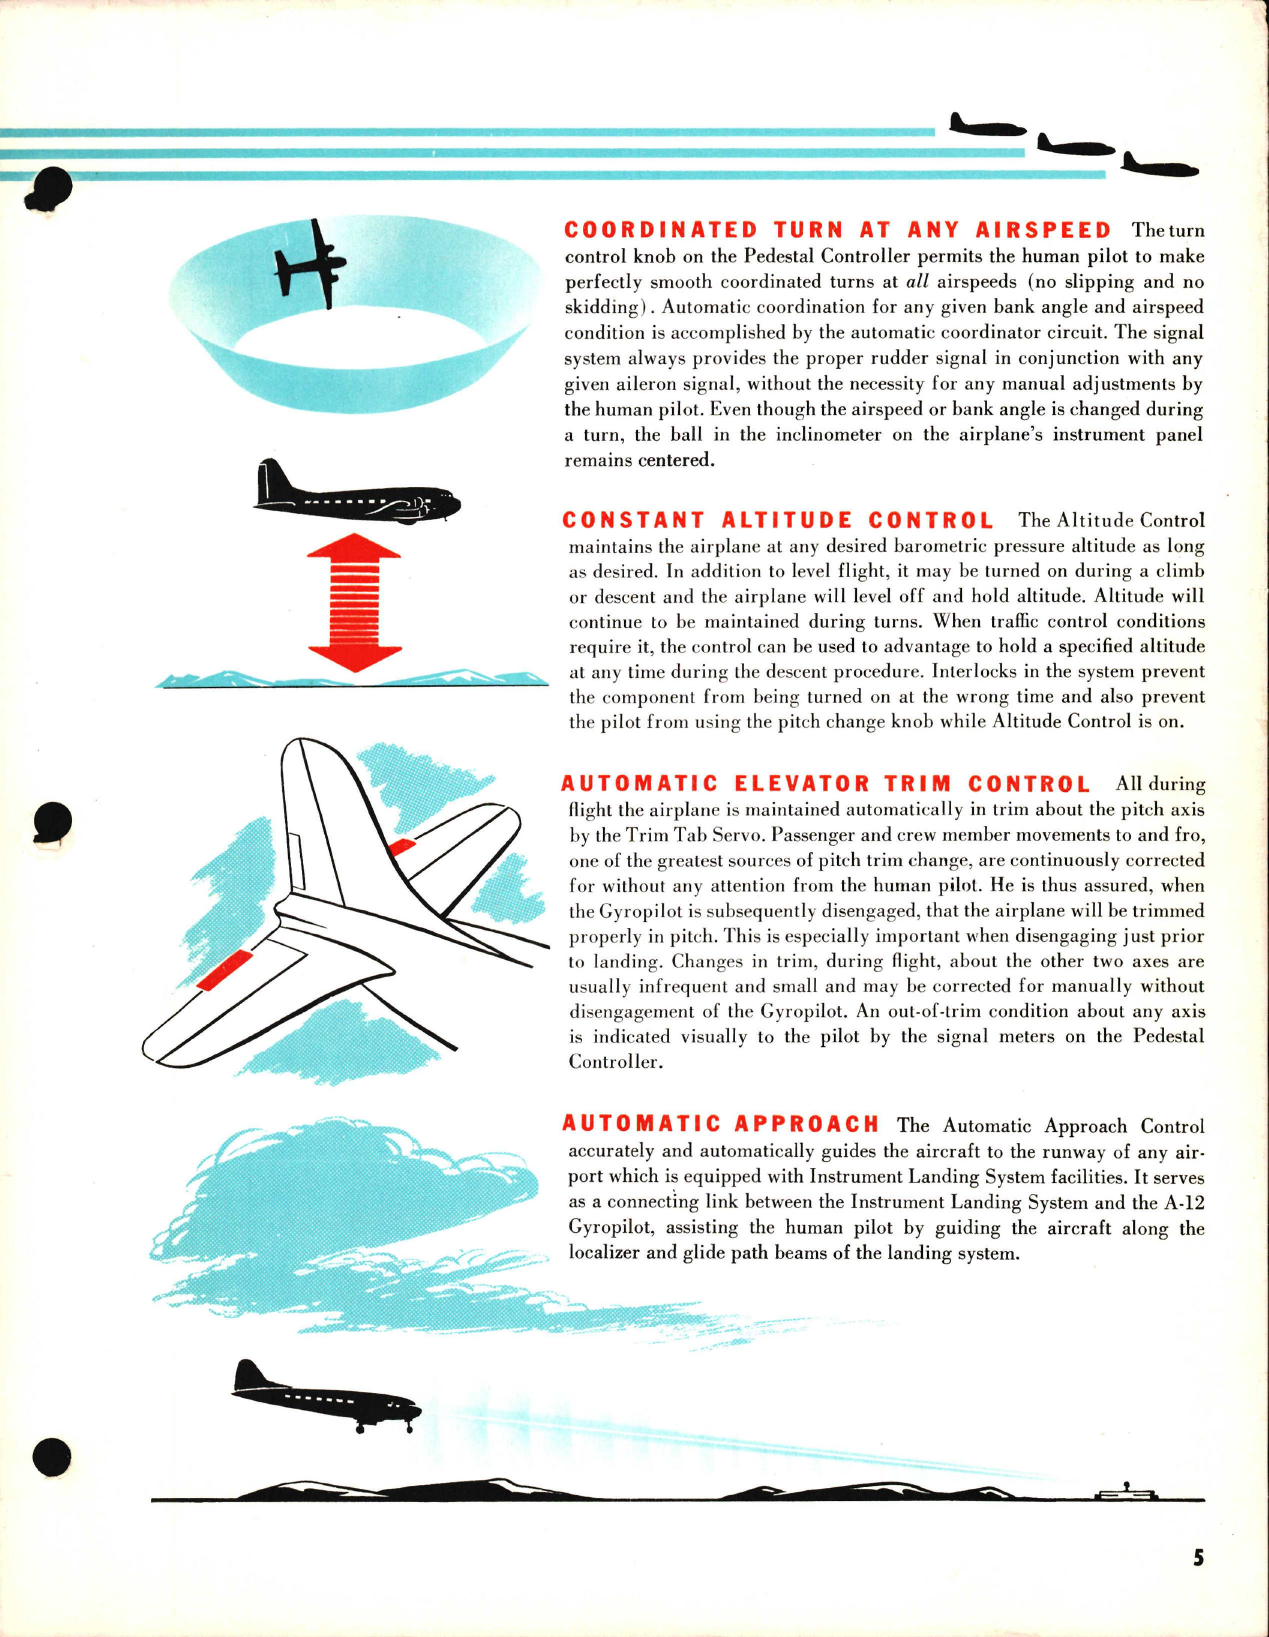 Sample page 7 from AirCorps Library document: Operation and Service for Model A-12 Gyropilot Flight Control